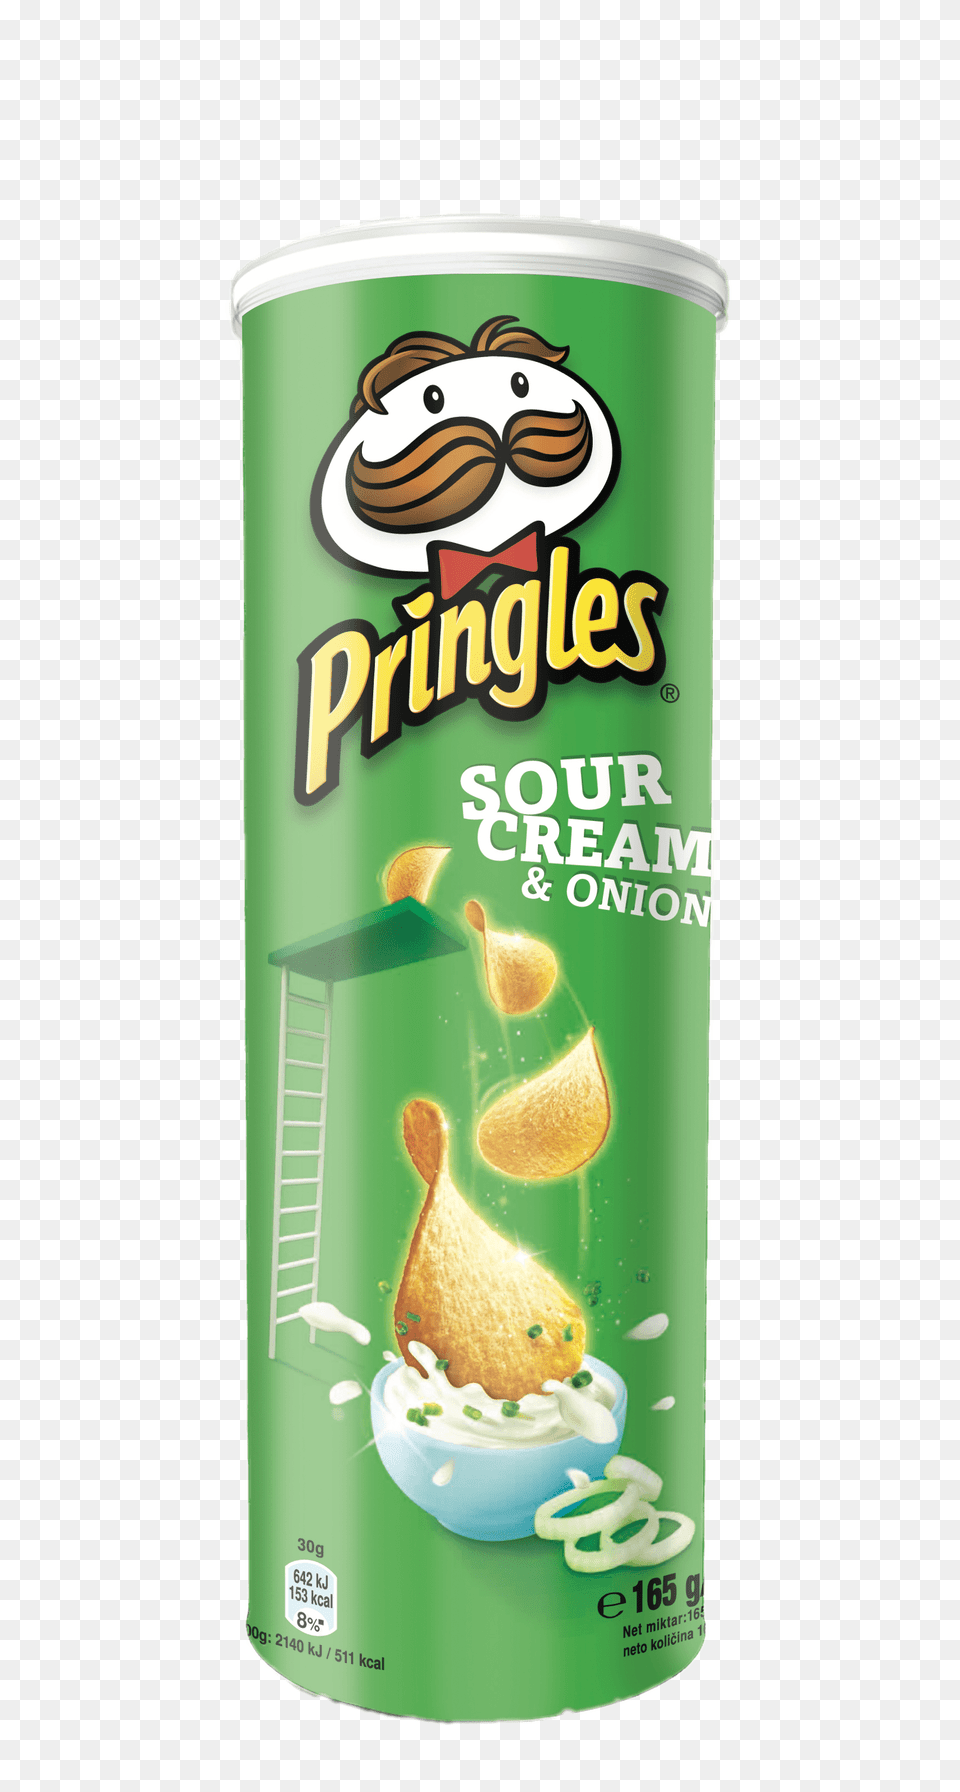 Pringles Sour Creamonions, Tin, Can Free Png Download